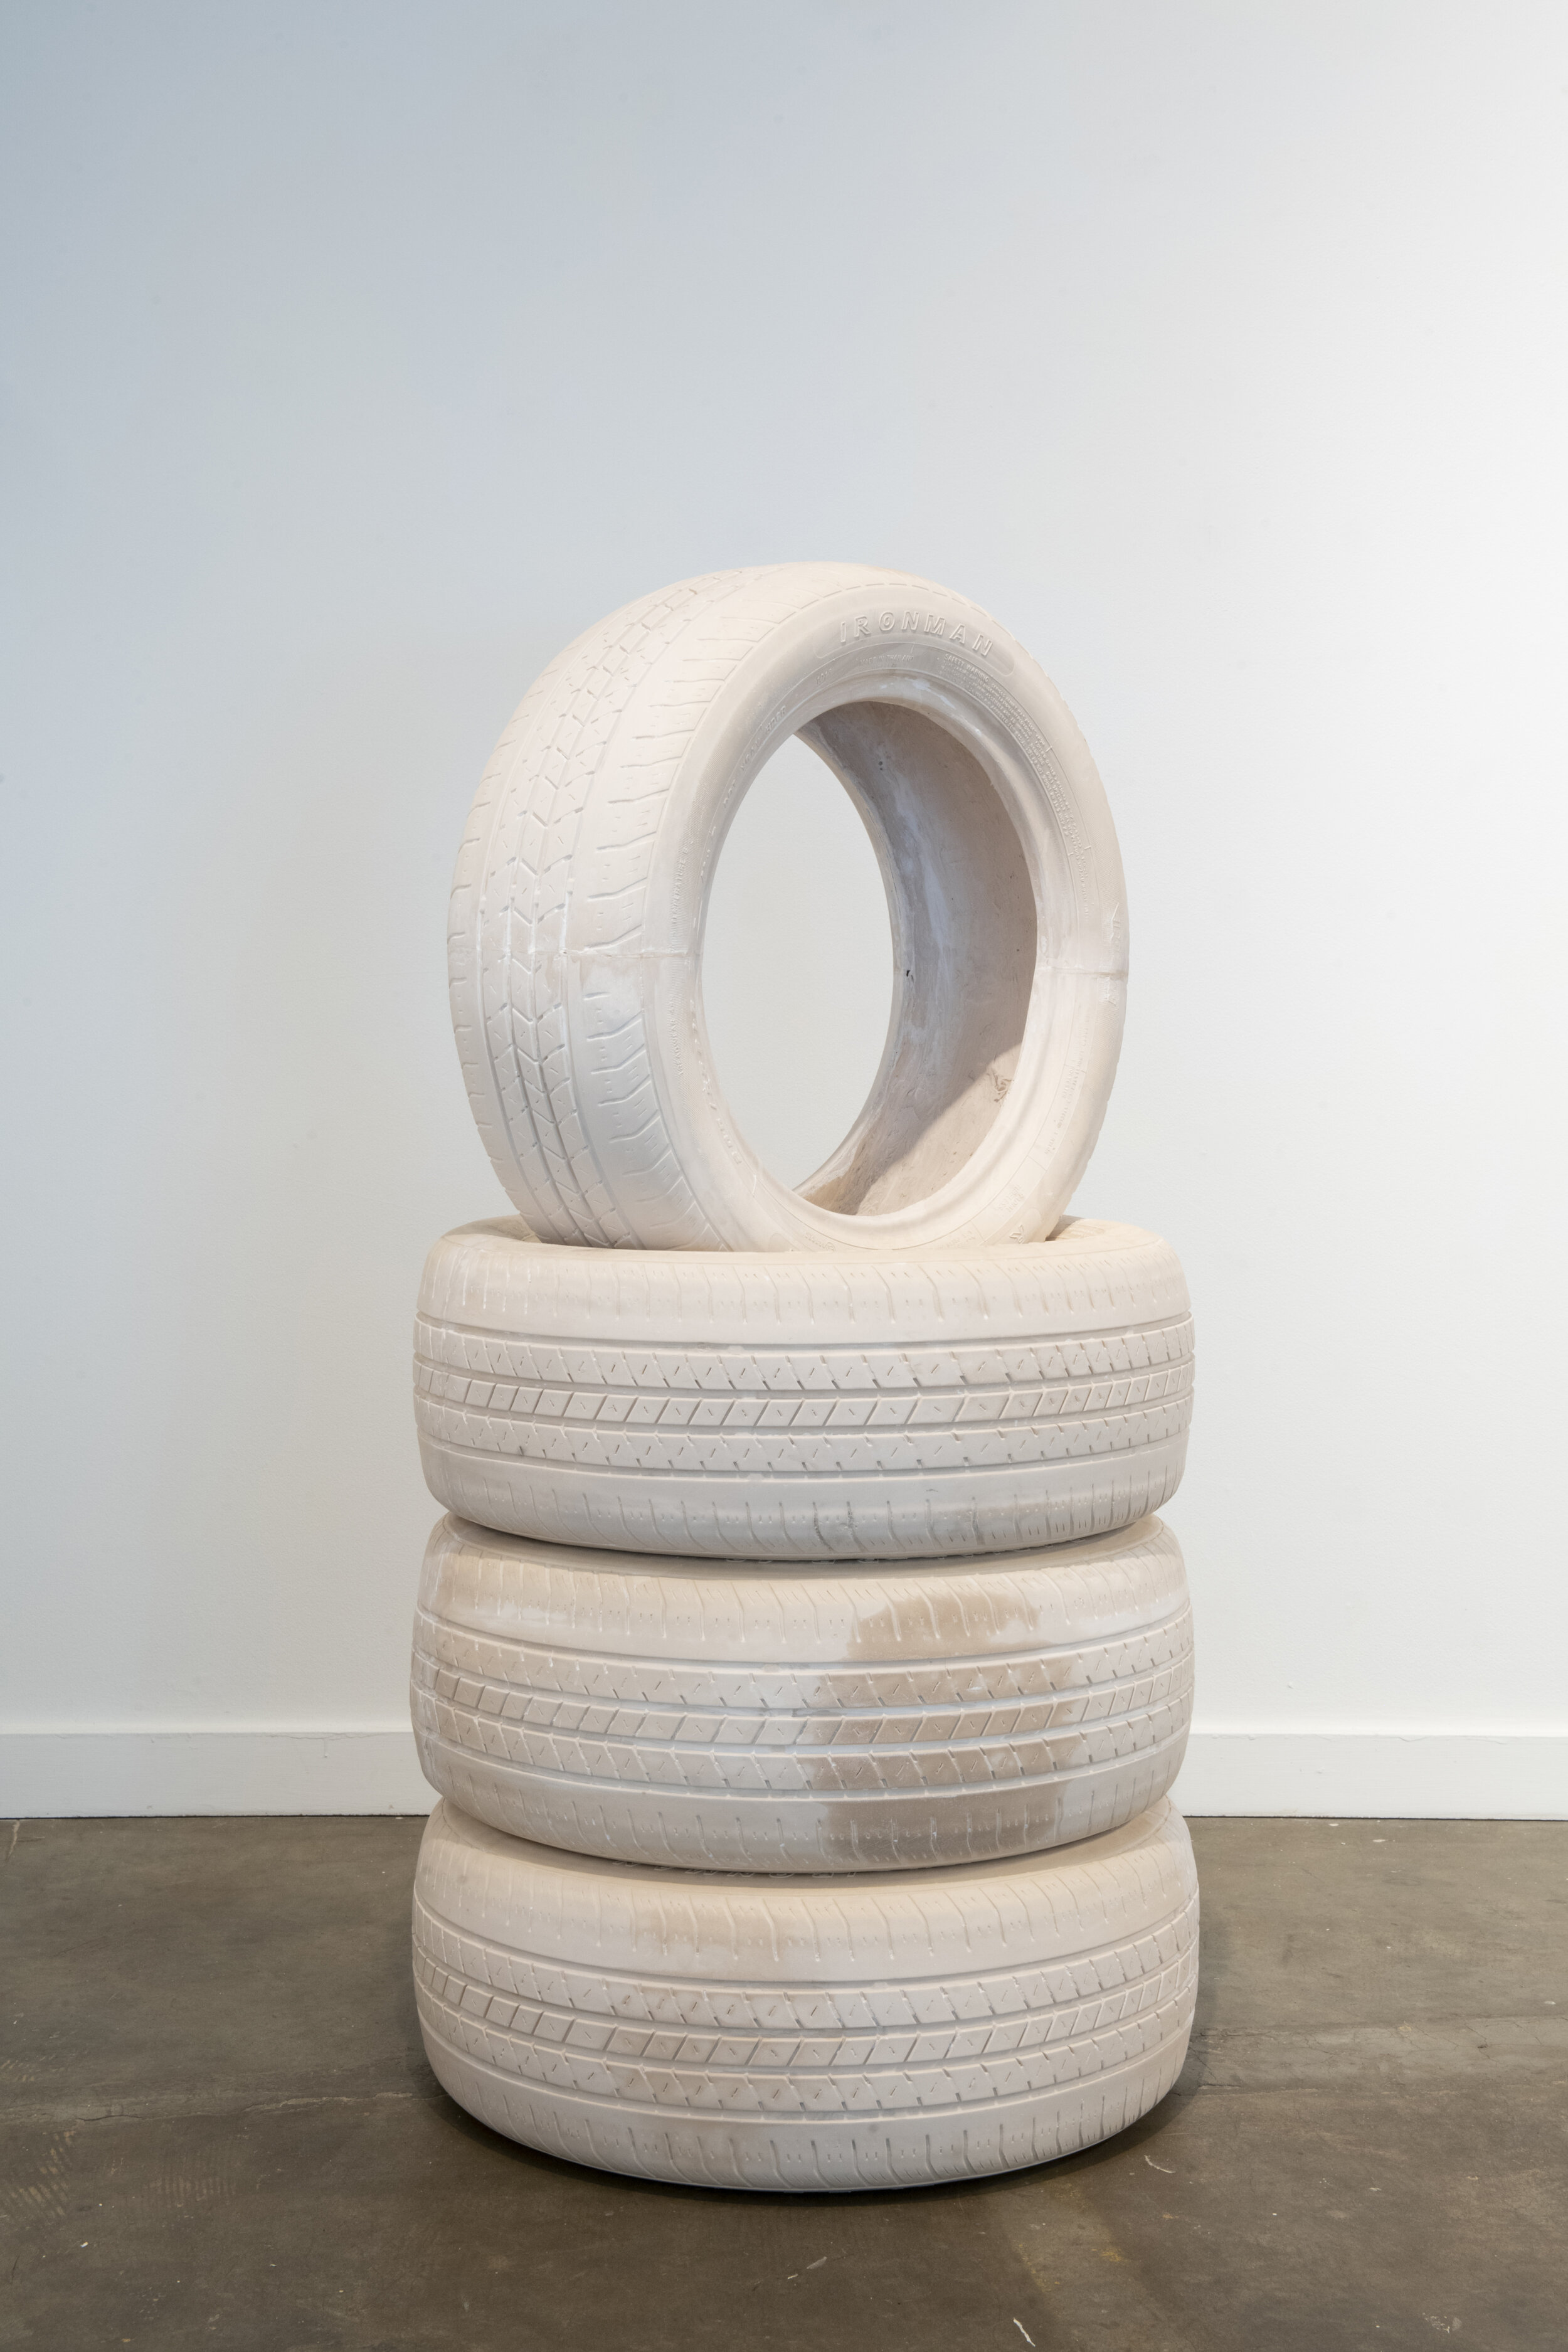    Tires,   2019  Fiberglass, marble dust, and resin  47 x 23 x 23 in. 